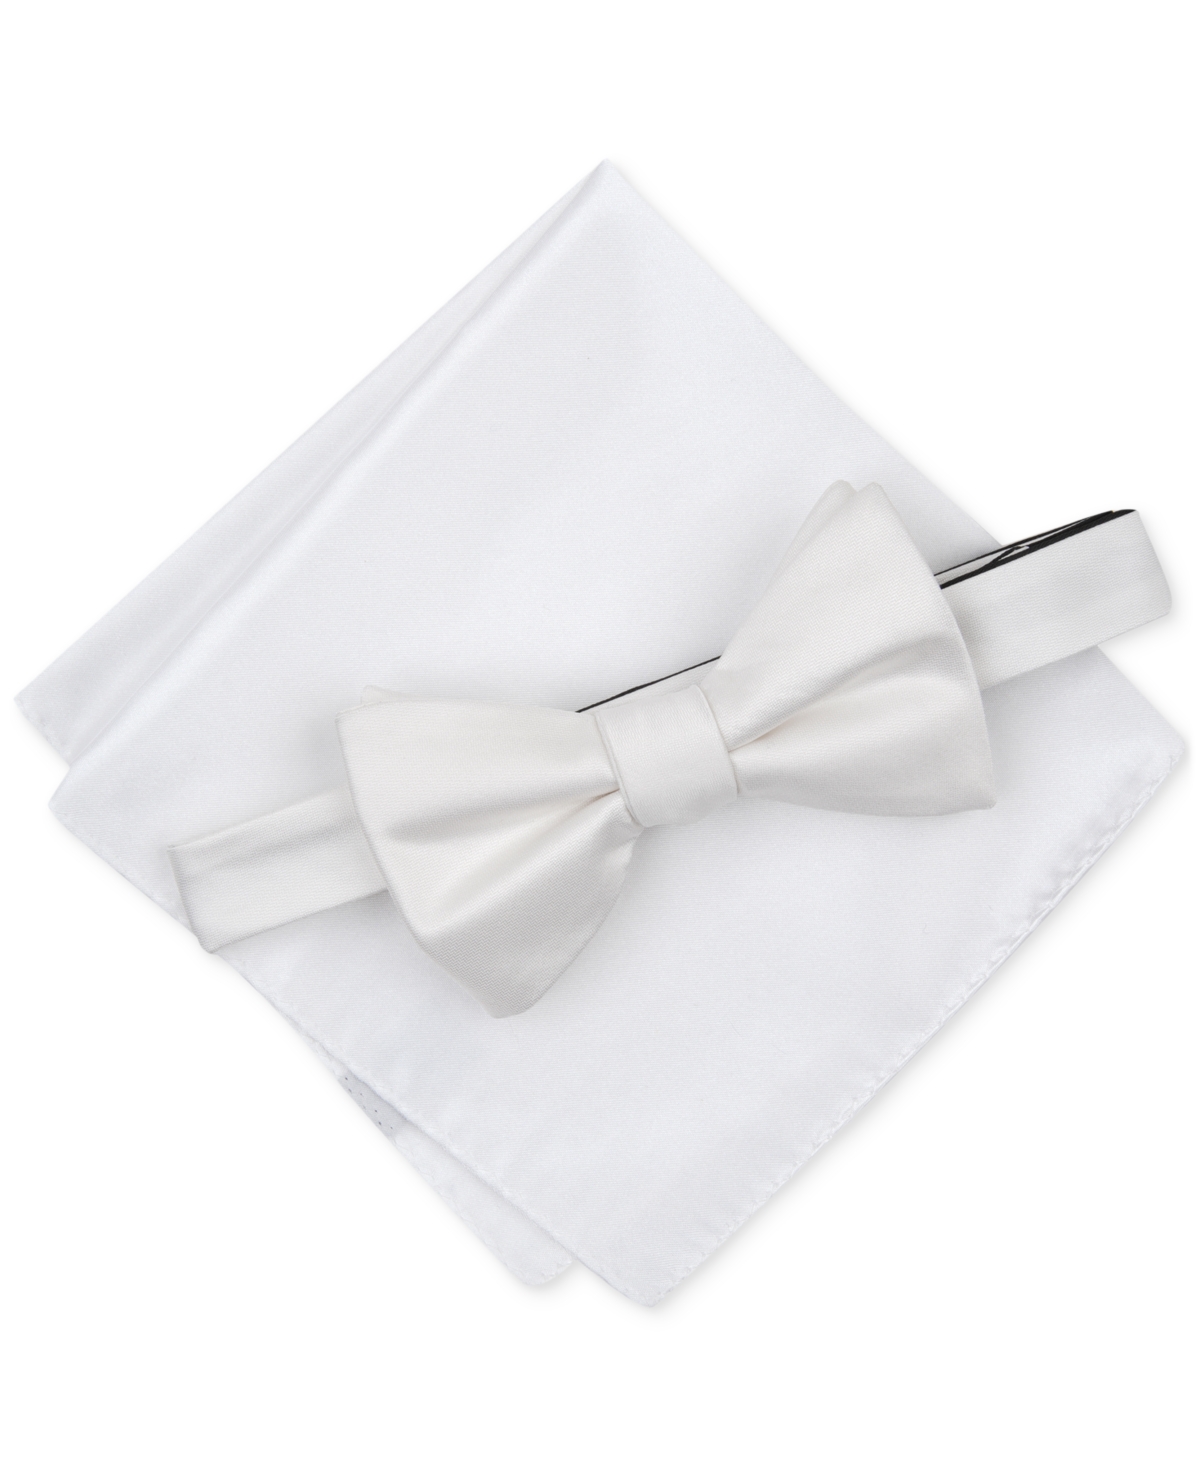 Men's Solid Texture Pocket Square and Bowtie, Created for Macy's - White